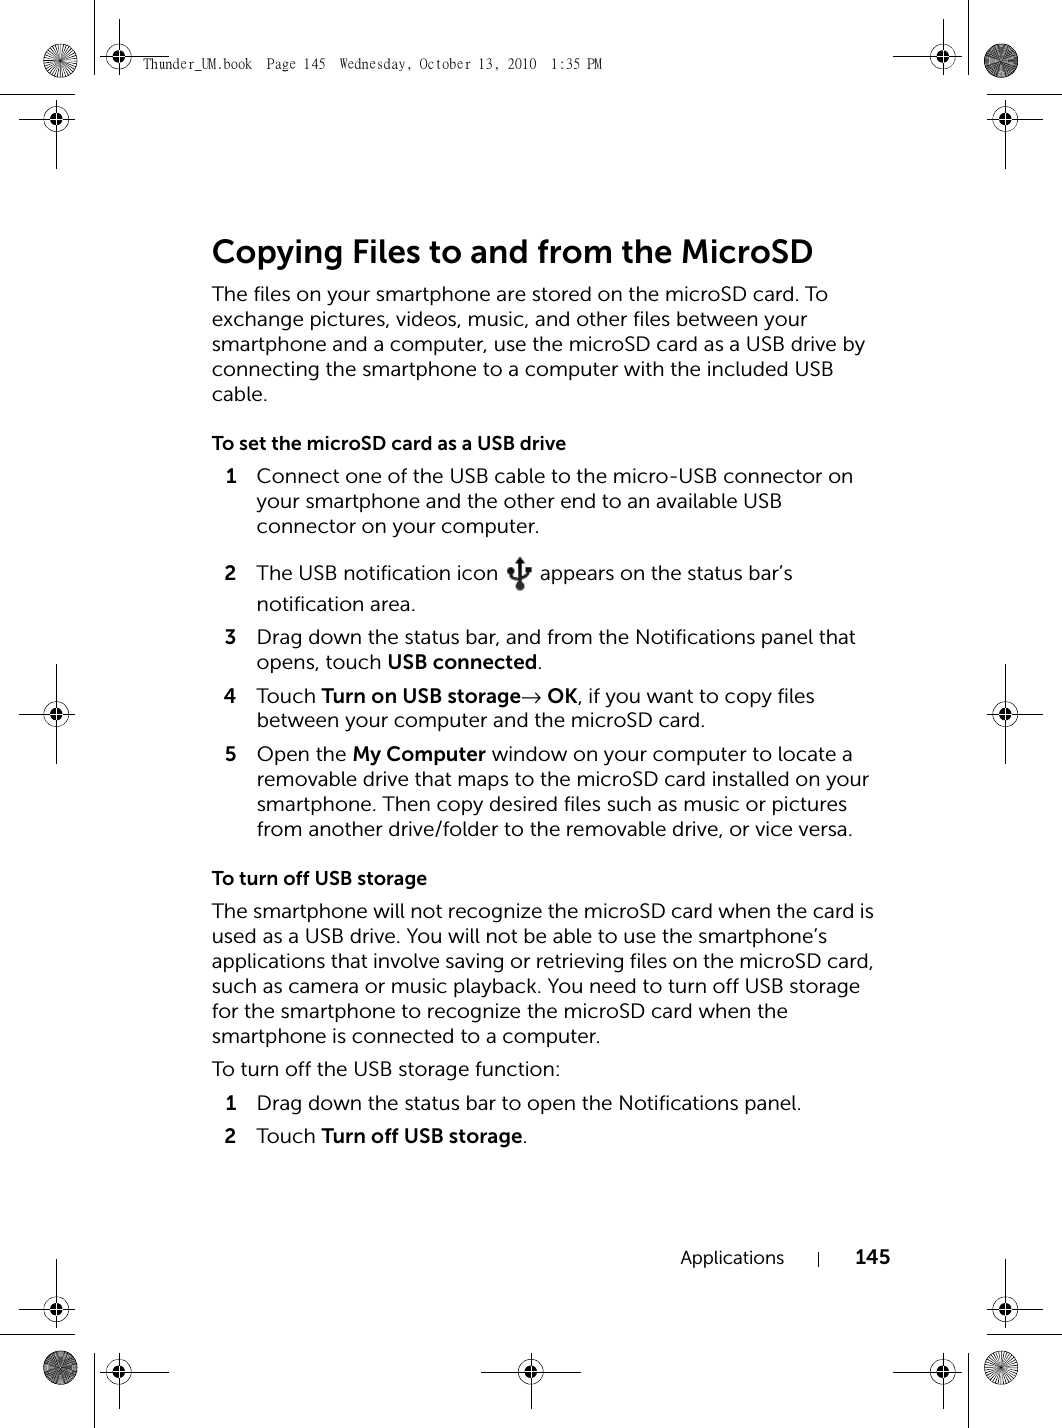 Applications 145Copying Files to and from the MicroSDThe files on your smartphone are stored on the microSD card. To exchange pictures, videos, music, and other files between your smartphone and a computer, use the microSD card as a USB drive by connecting the smartphone to a computer with the included USB cable.To set the microSD card as a USB drive1Connect one of the USB cable to the micro-USB connector on your smartphone and the other end to an available USB connector on your computer.2The USB notification icon   appears on the status bar’s notification area.3Drag down the status bar, and from the Notifications panel that opens, touch USB connected.4Touch  Turn on USB storage→ OK, if you want to copy files between your computer and the microSD card.5Open the My Computer window on your computer to locate a removable drive that maps to the microSD card installed on your smartphone. Then copy desired files such as music or pictures from another drive/folder to the removable drive, or vice versa.To turn off USB storageThe smartphone will not recognize the microSD card when the card is used as a USB drive. You will not be able to use the smartphone’s applications that involve saving or retrieving files on the microSD card, such as camera or music playback. You need to turn off USB storage for the smartphone to recognize the microSD card when the smartphone is connected to a computer.To turn off the USB storage function:1Drag down the status bar to open the Notifications panel.2Touch  Turn off USB storage.Thunder_UM.book  Page 145  Wednesday, October 13, 2010  1:35 PM